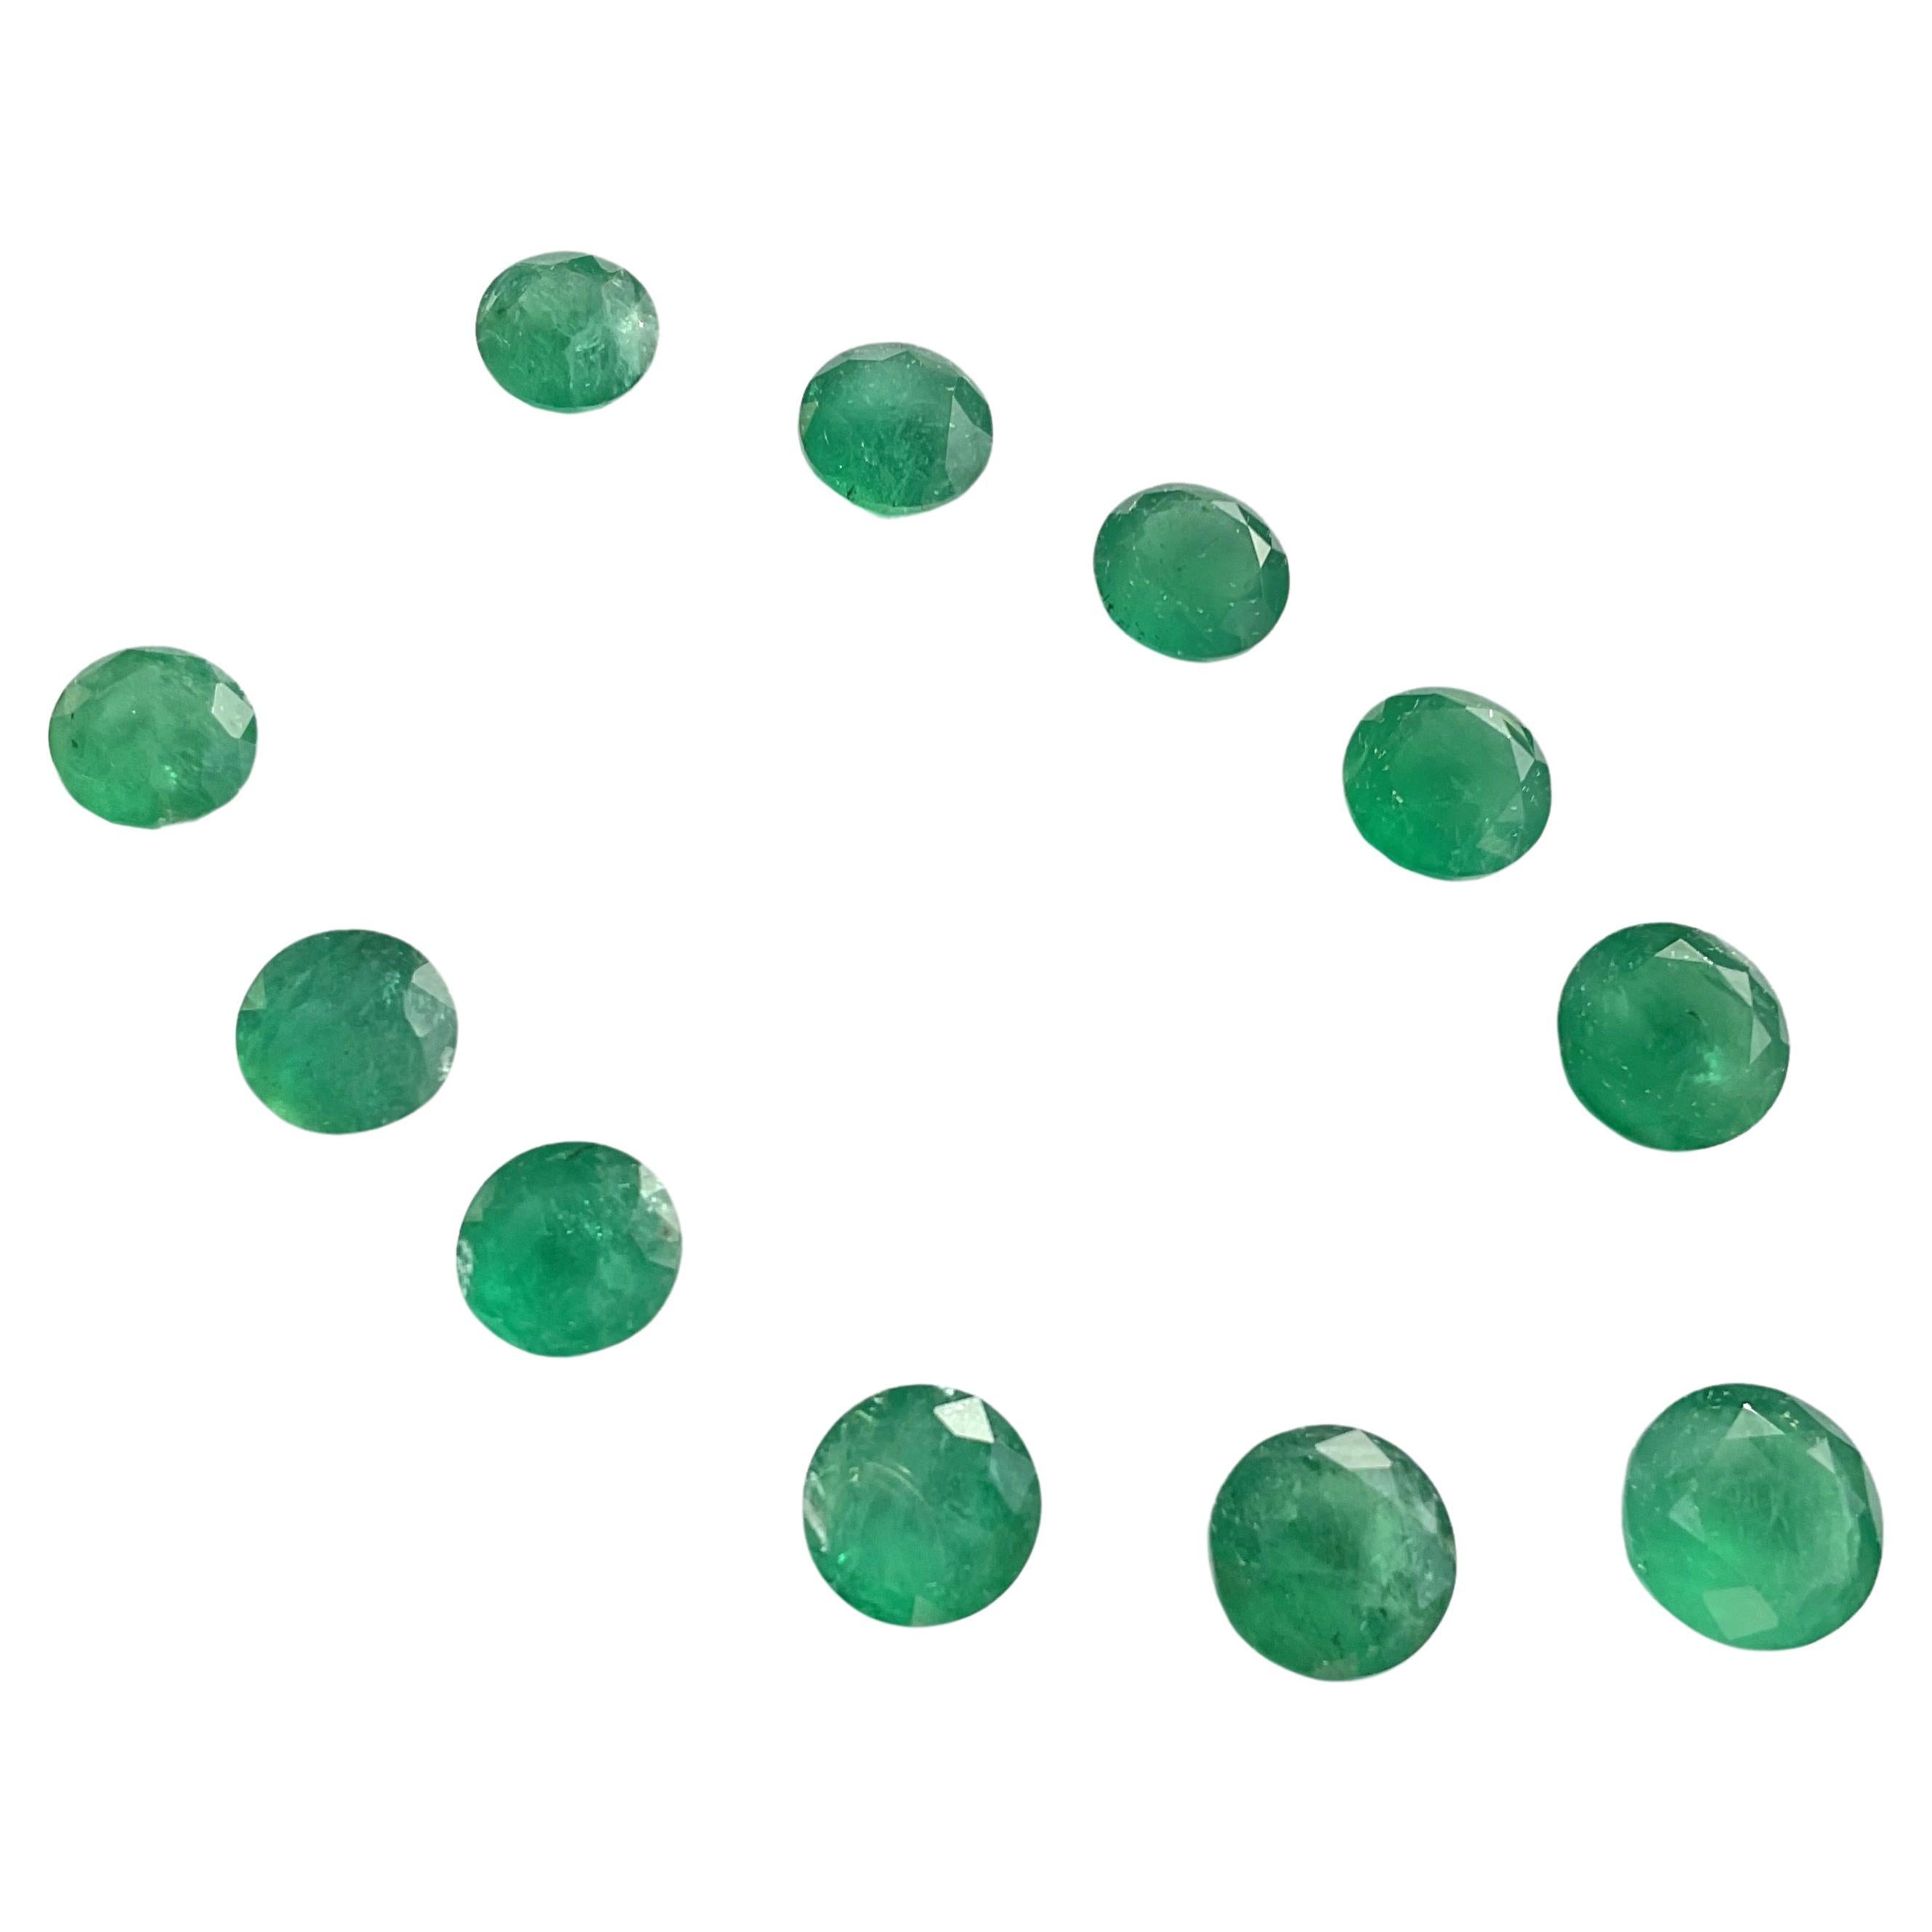 103.48 Carats Zambian Emerald Round Cutstone Layout 11 Pieces For Fine Jewelry For Sale